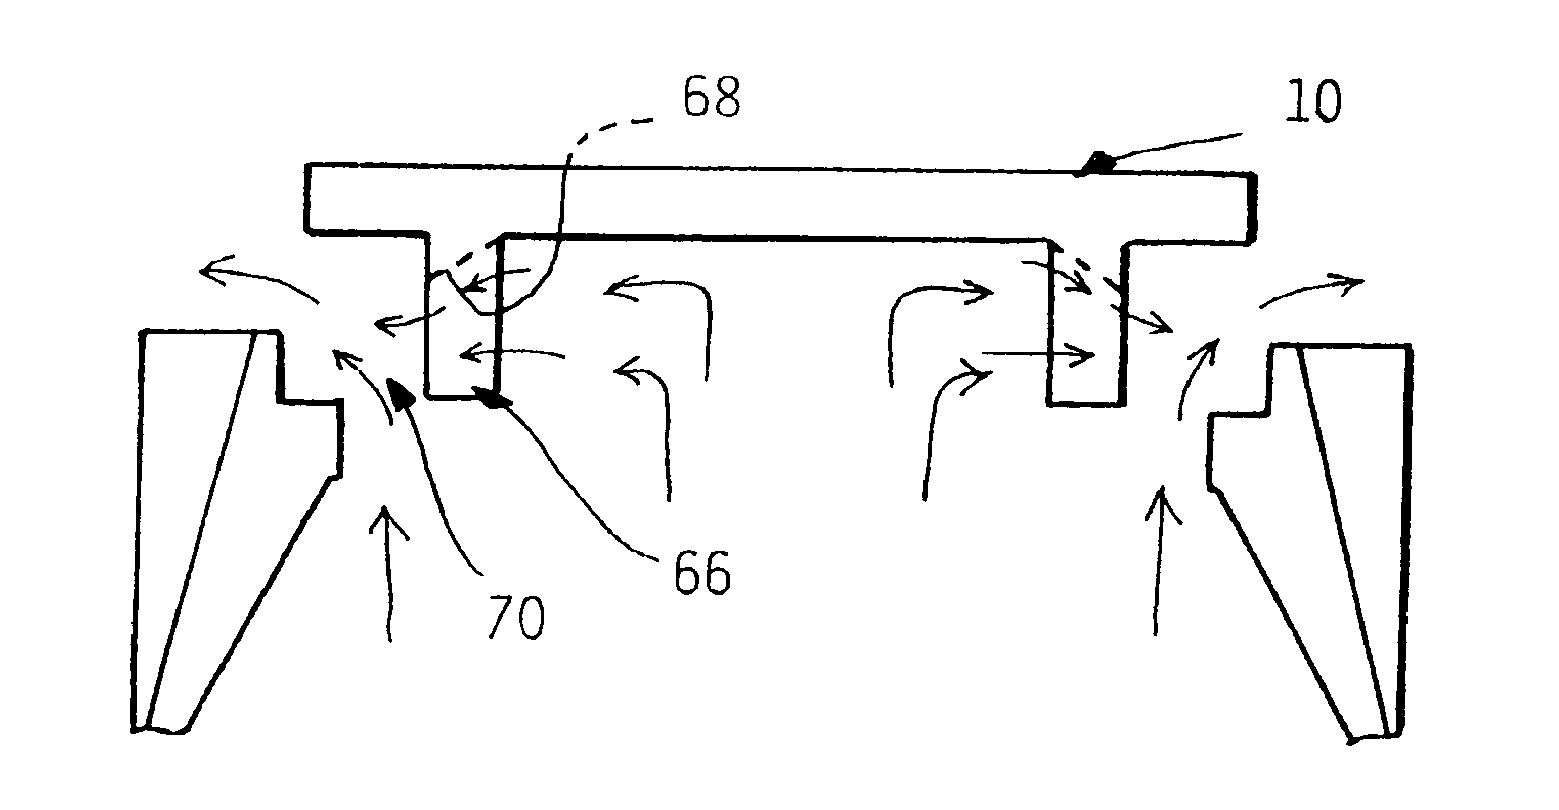 Method of controllably venting gases generated by explosions in a manhole space